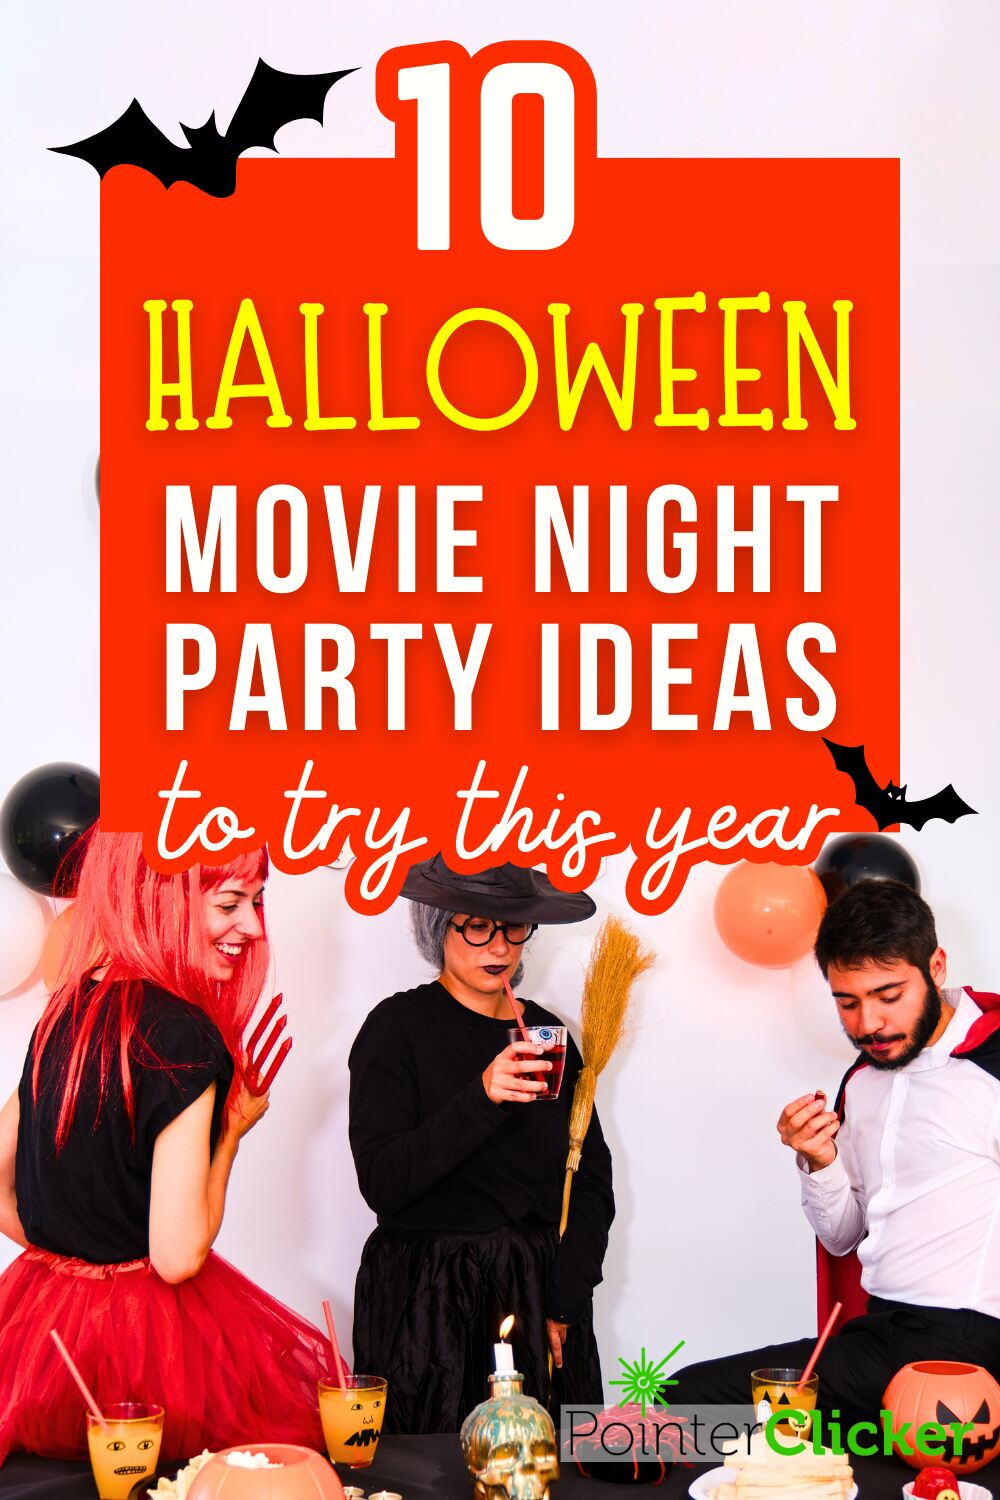 In the image, there are 3 persons in Halloween costumes and are having a Halloween party. The words say '10 Halloween movie night party ideas to try this year'